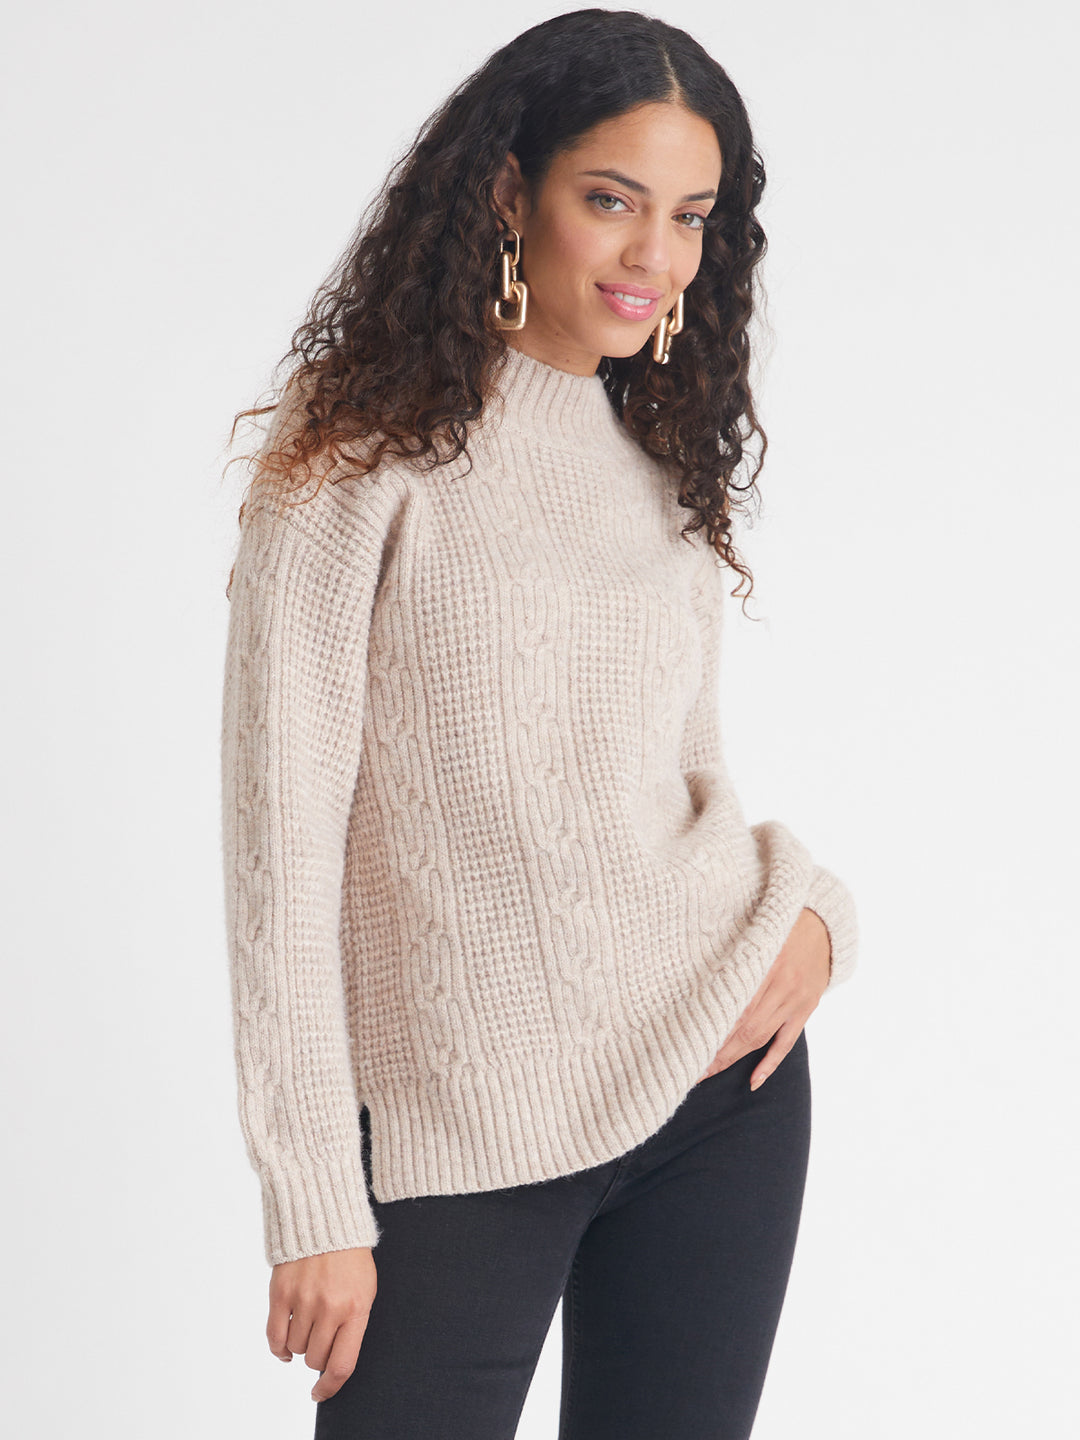 Lexi Mockneck Cable Pullover in Cashew Heather